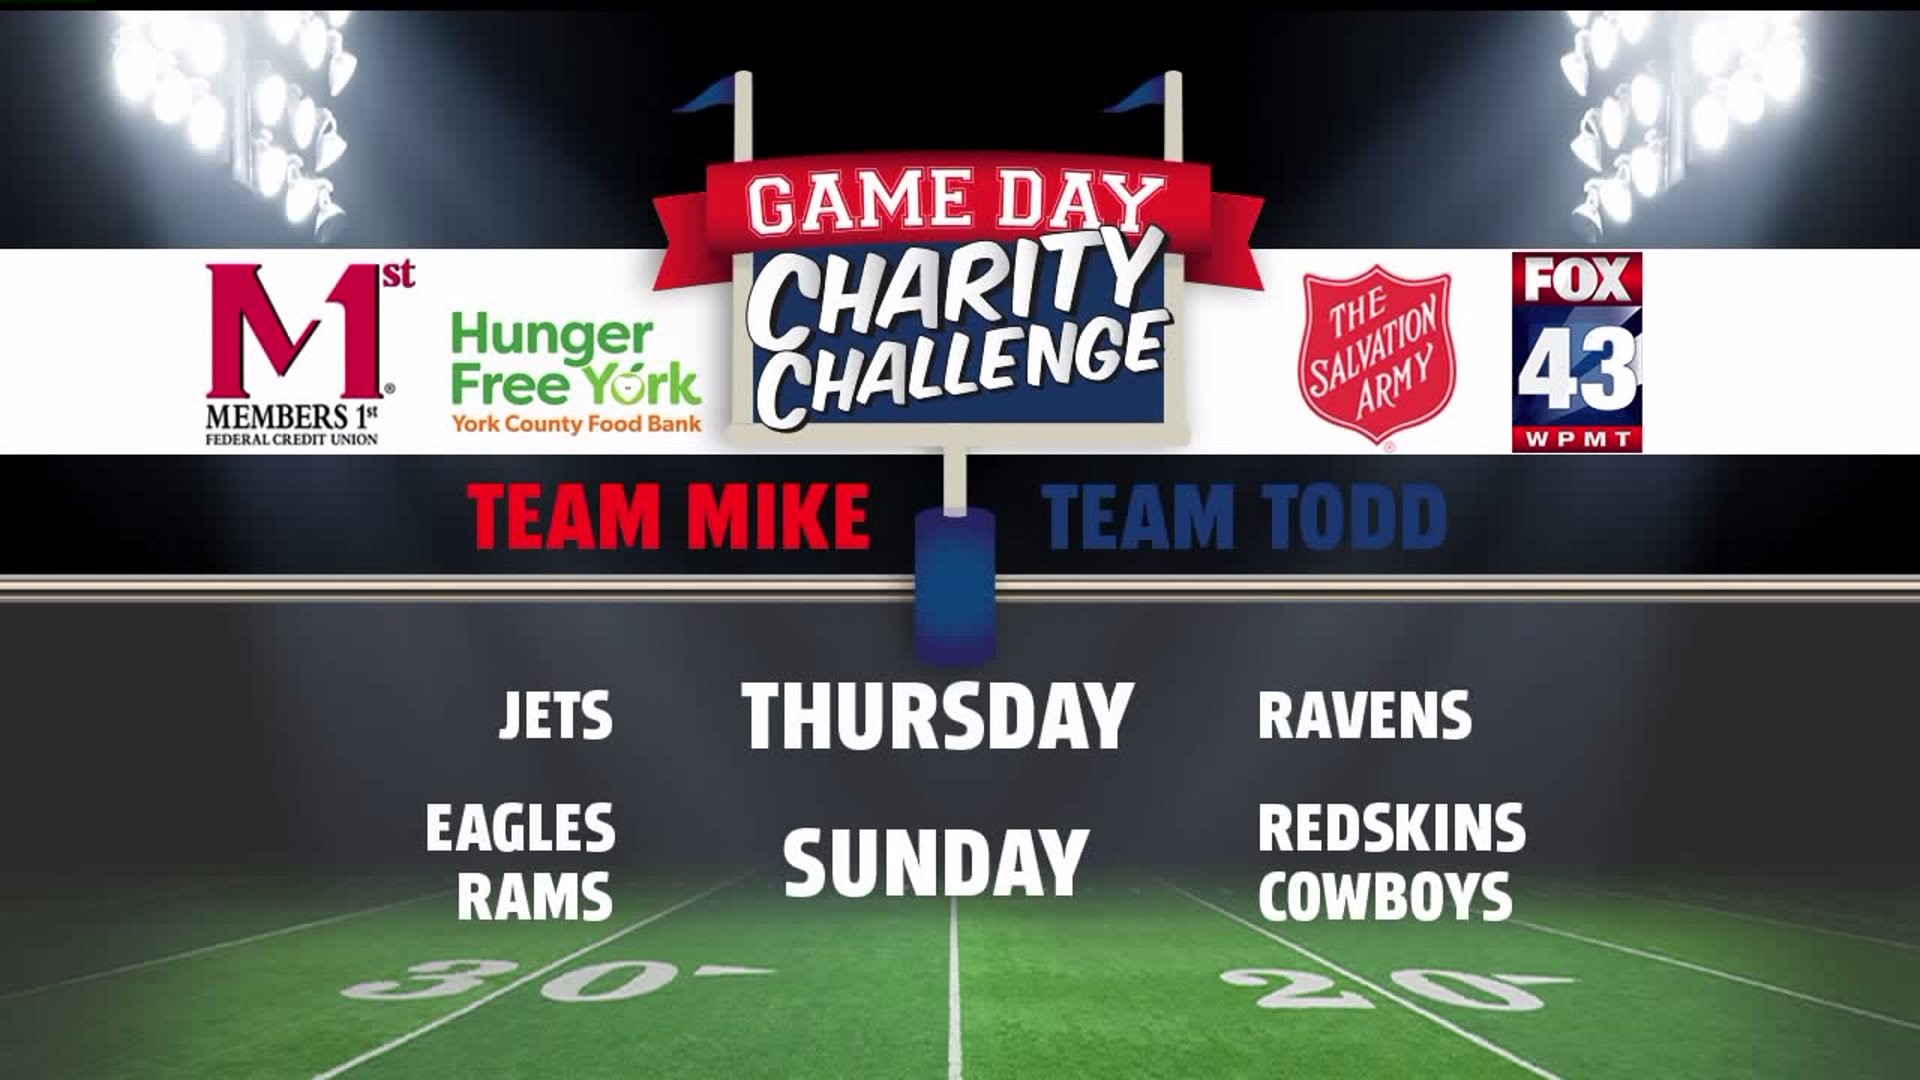 Game Day Charity Challenge (Week 12)